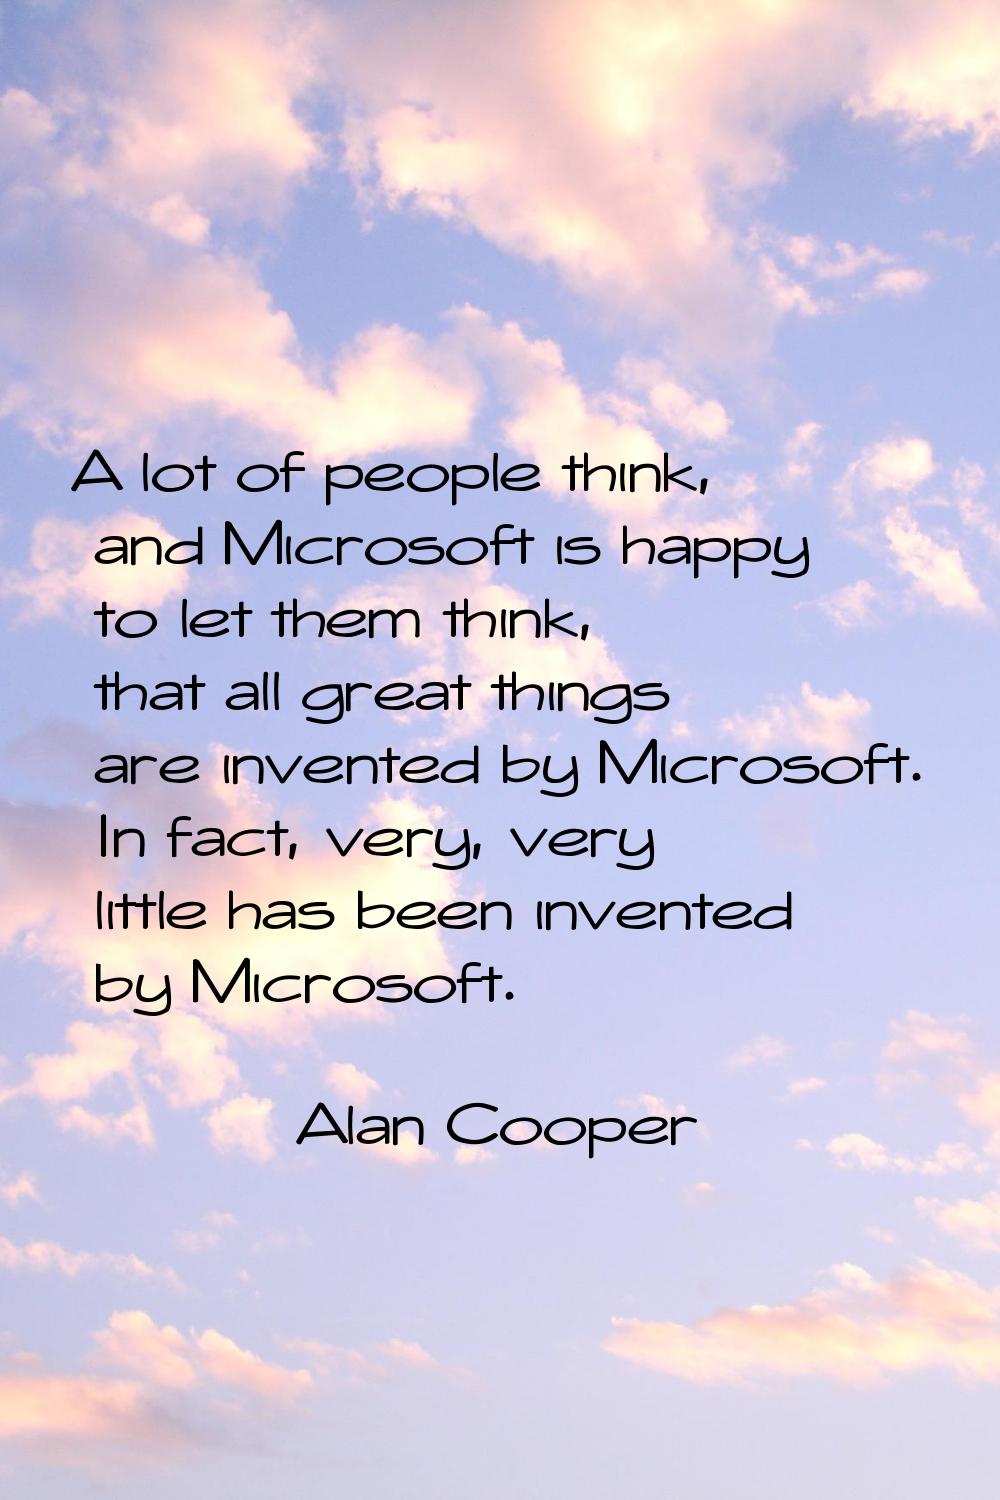 A lot of people think, and Microsoft is happy to let them think, that all great things are invented